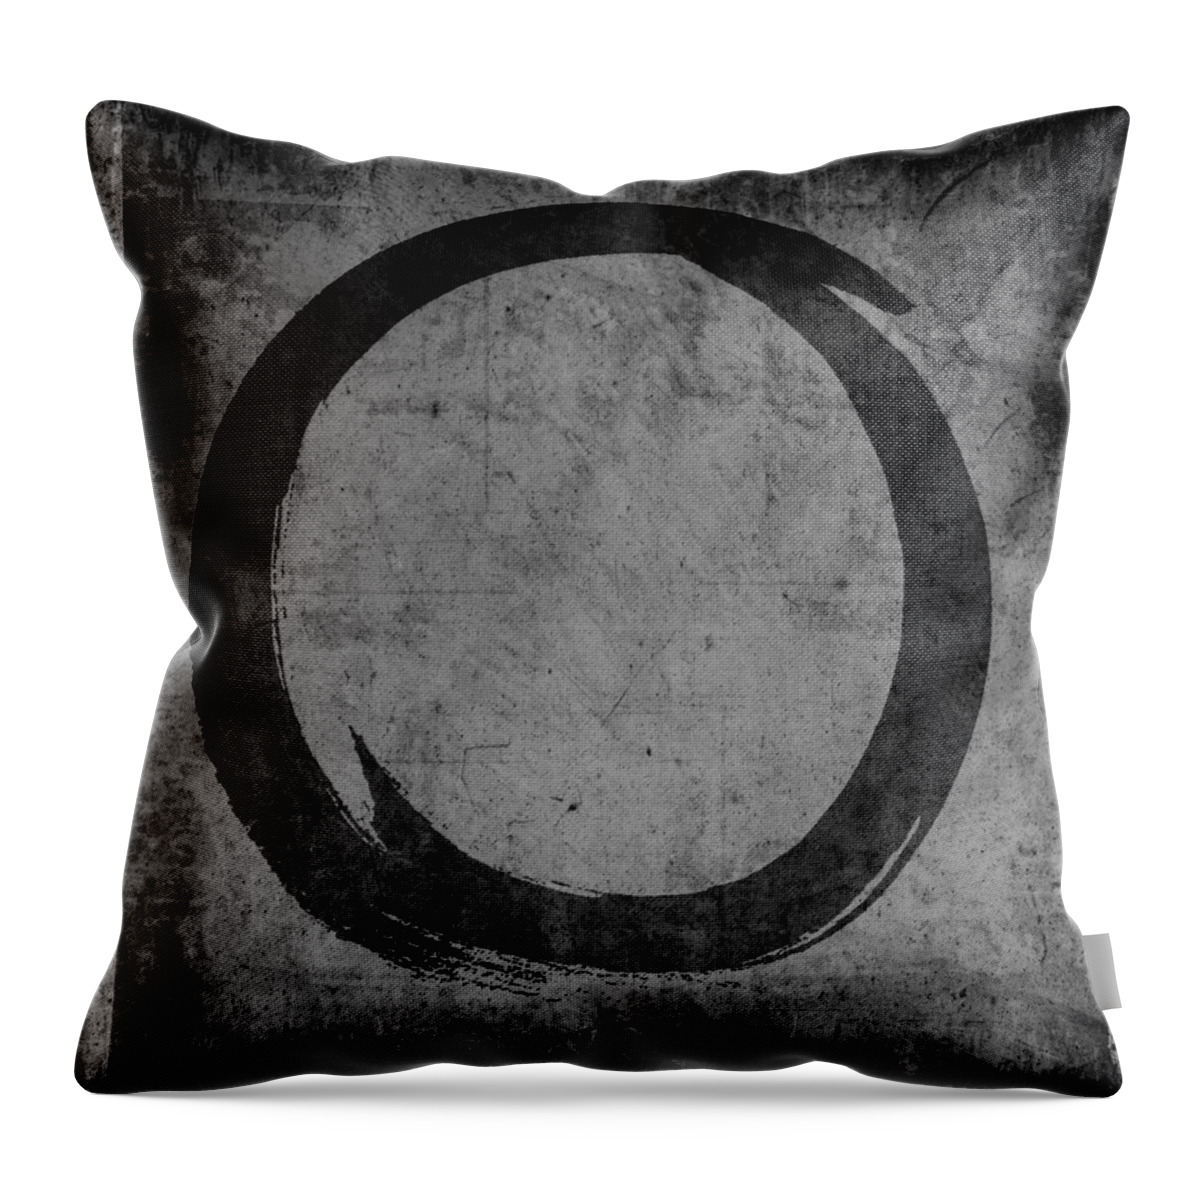 Blck Throw Pillow featuring the painting Enso No. 108 Black on Gray by Julie Niemela